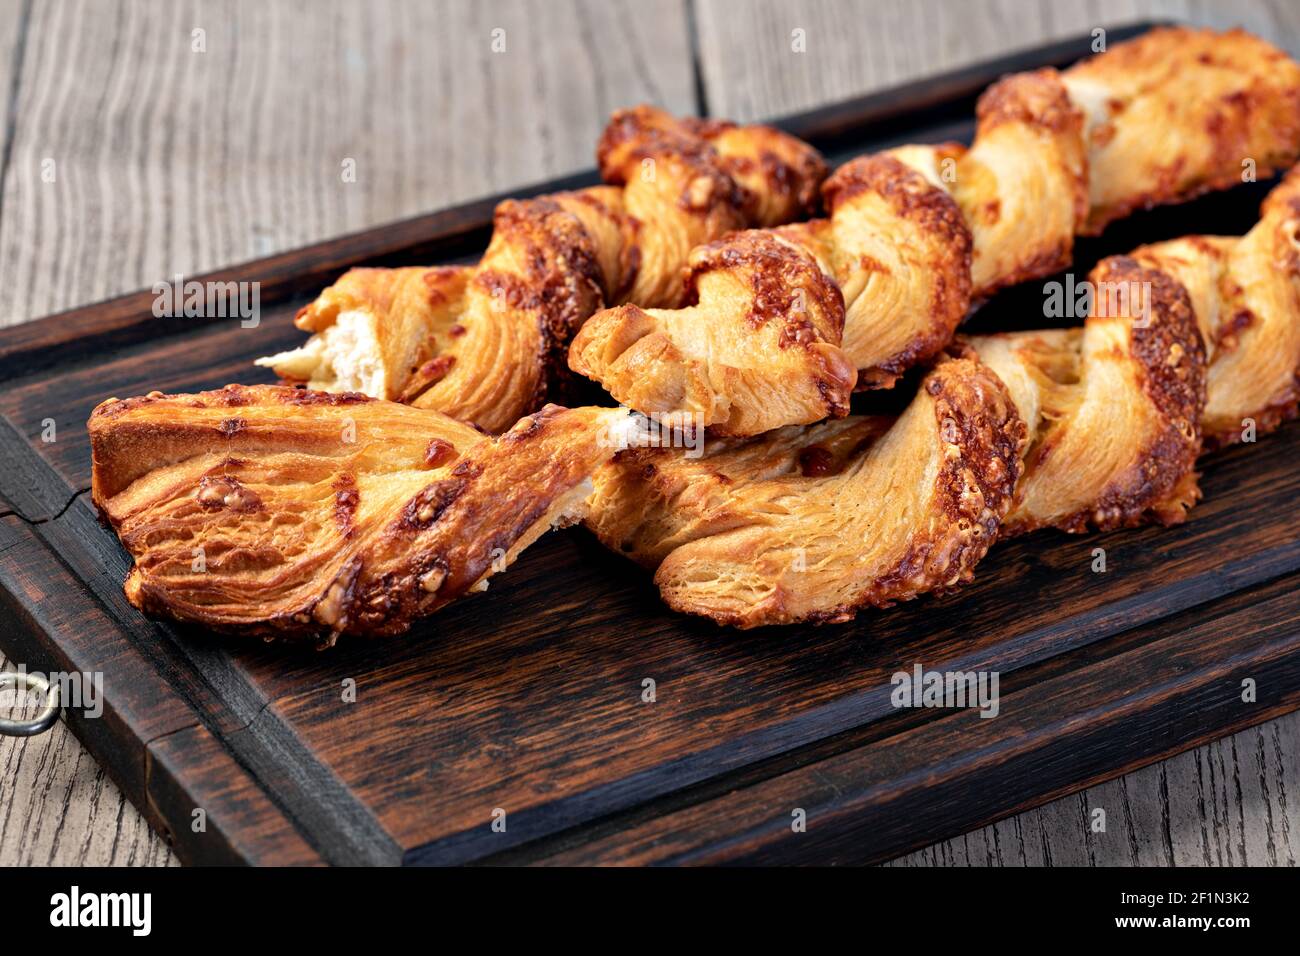 Cheese filled roll Stock Photo